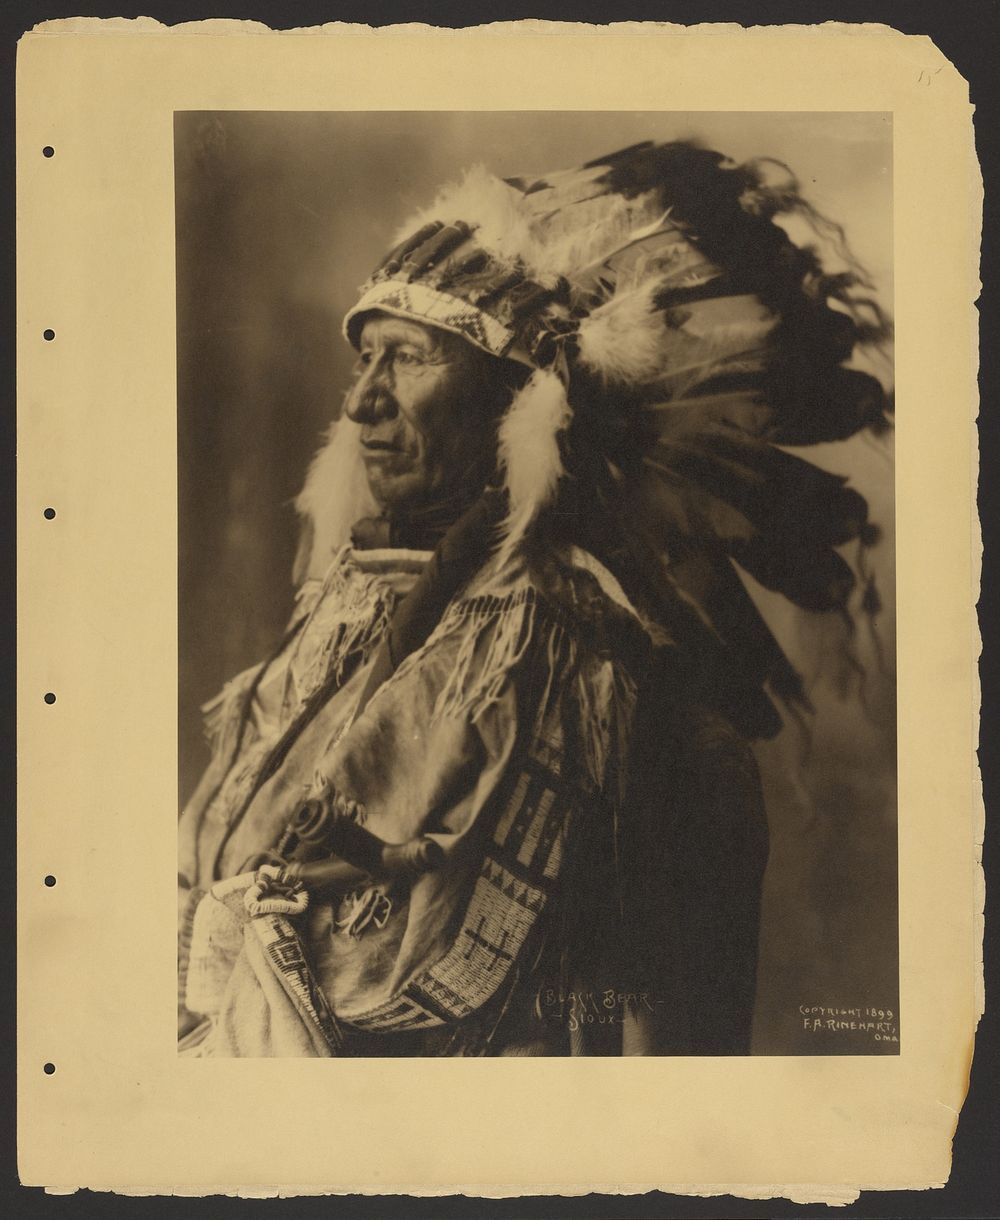 Black Bear, Sioux by Adolph F Muhr and Frank A Rinehart